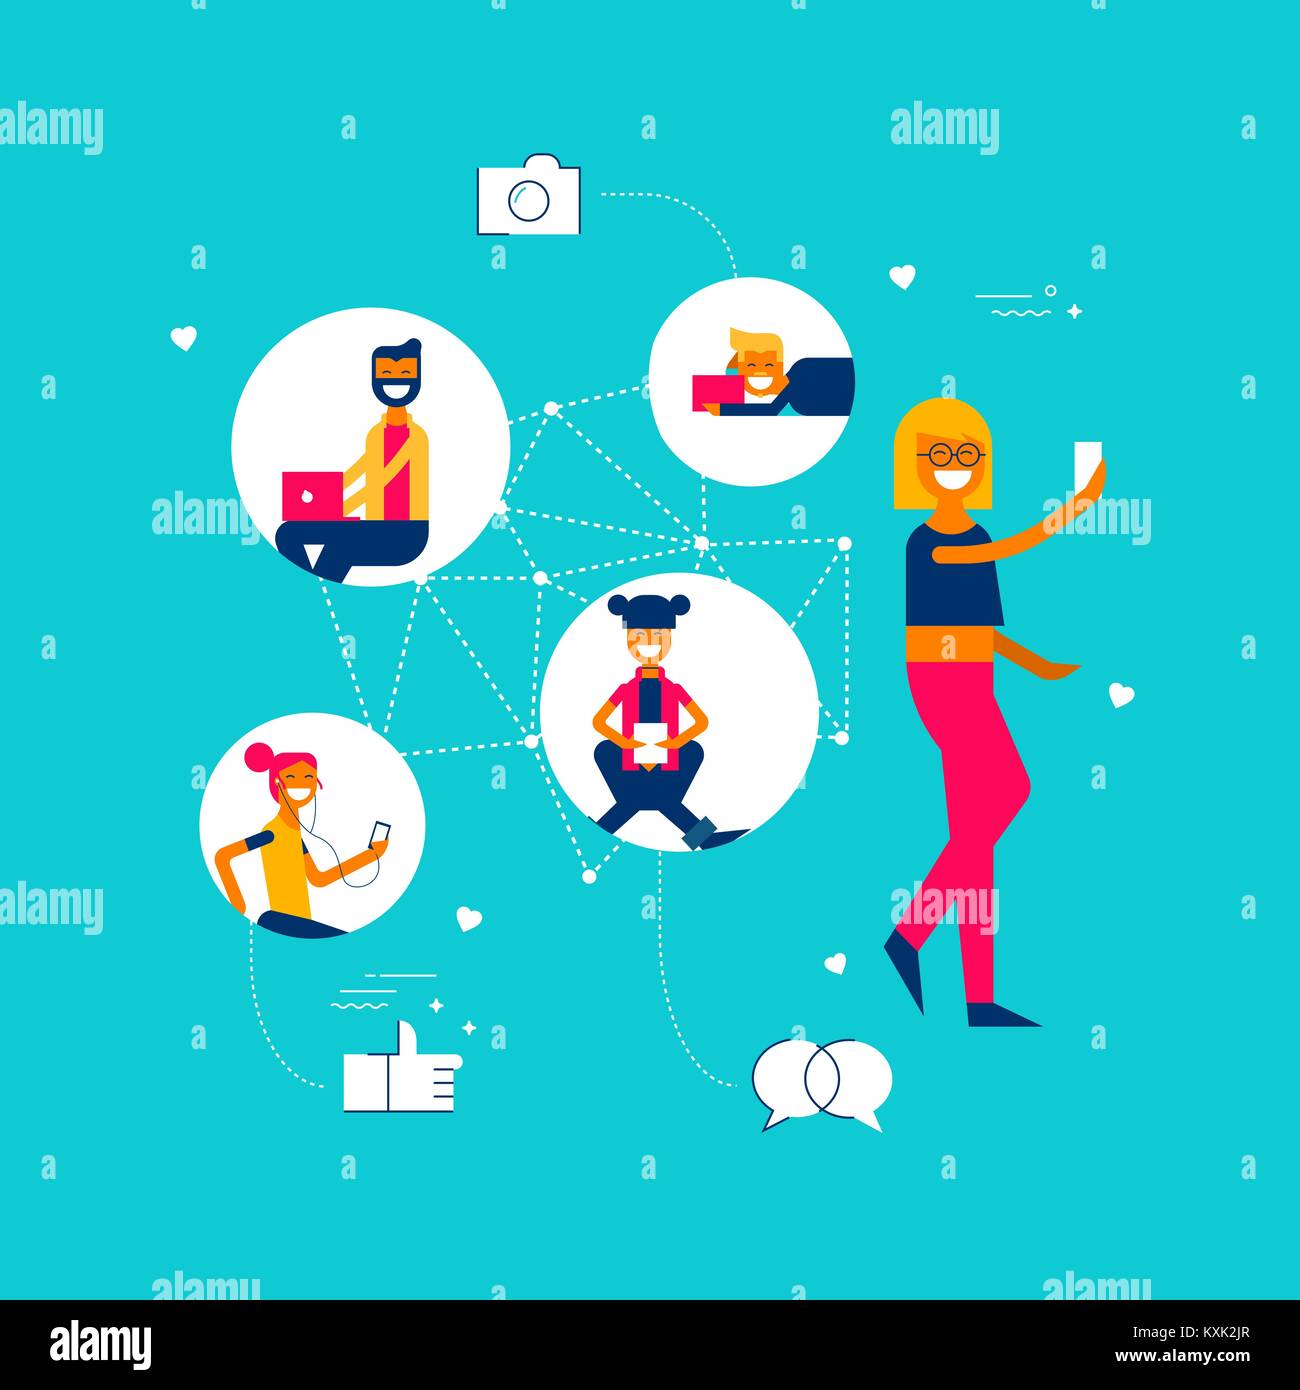 Girl on social media network app connected to diverse people group, internet influence concept illustration in modern flat art style with symbols and  Stock Vector